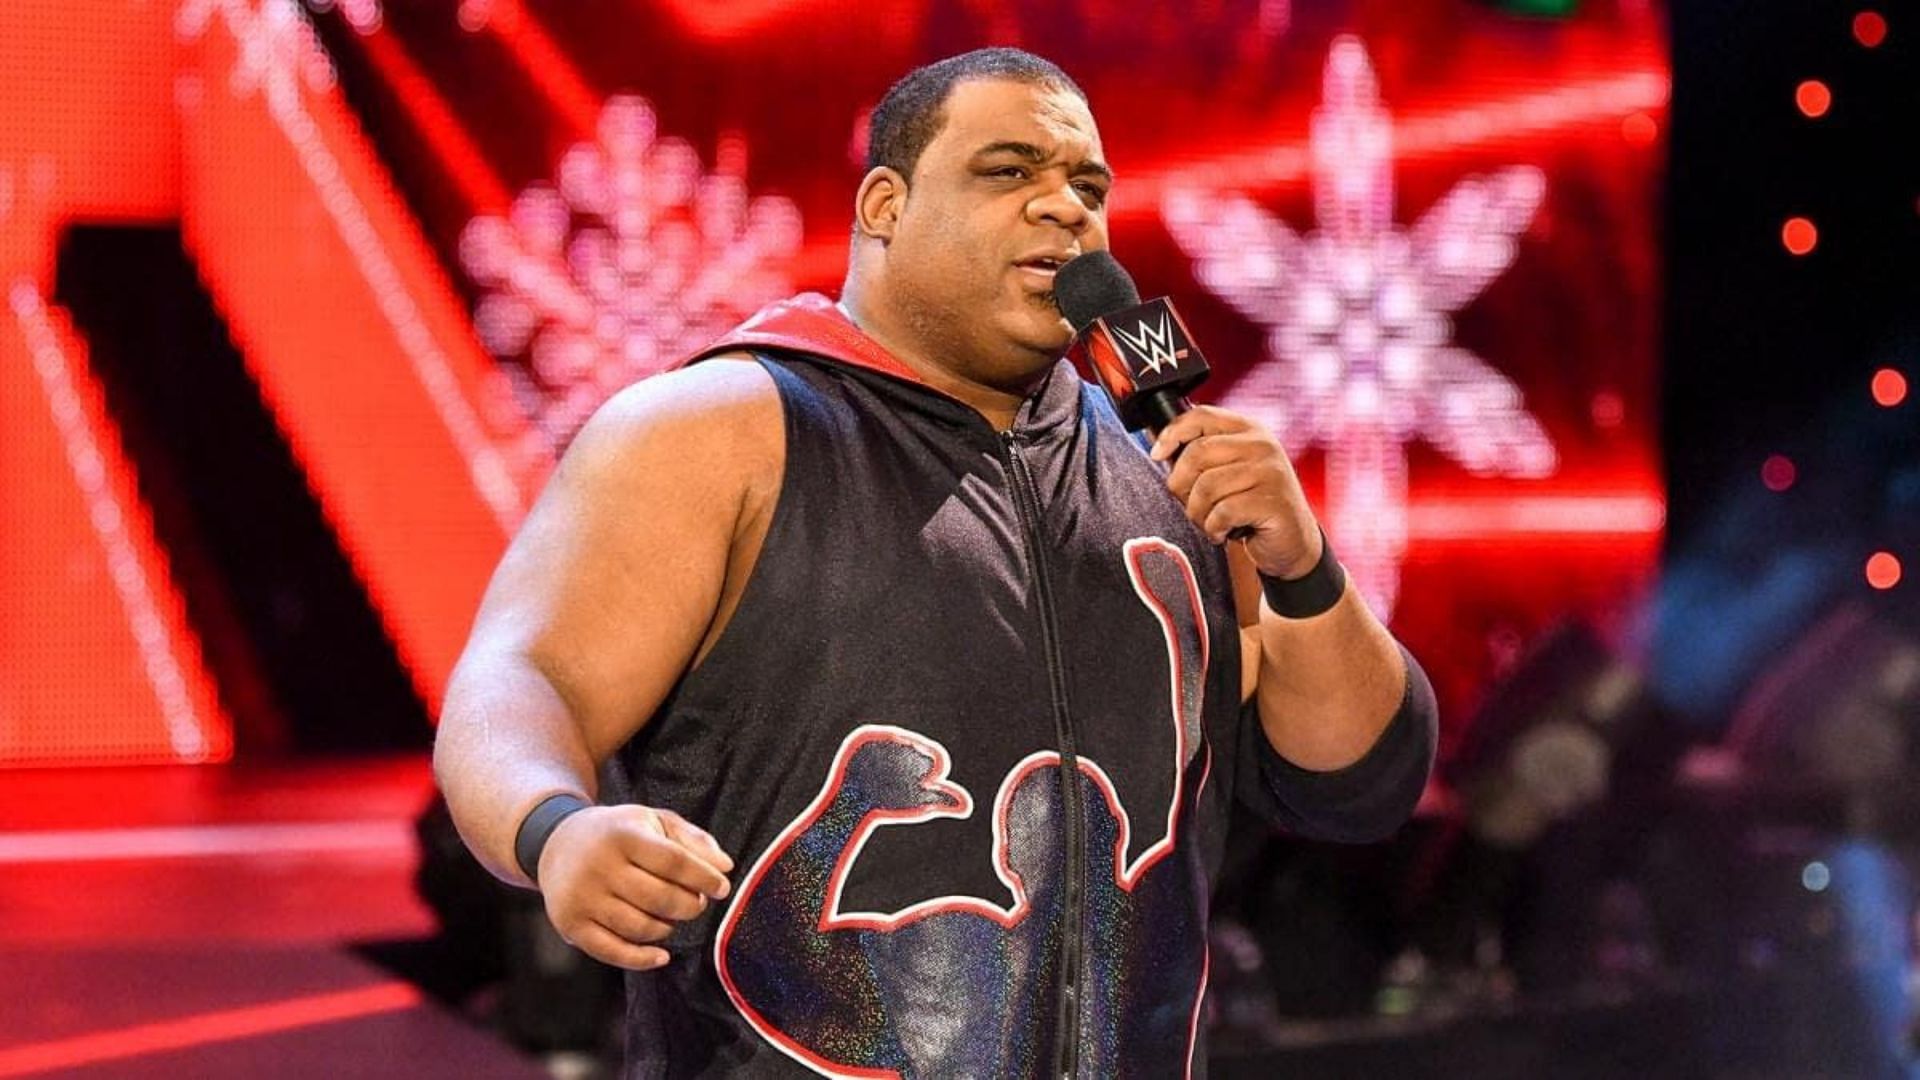 According to Keith Lee WWE did not like how he delivered his promos.